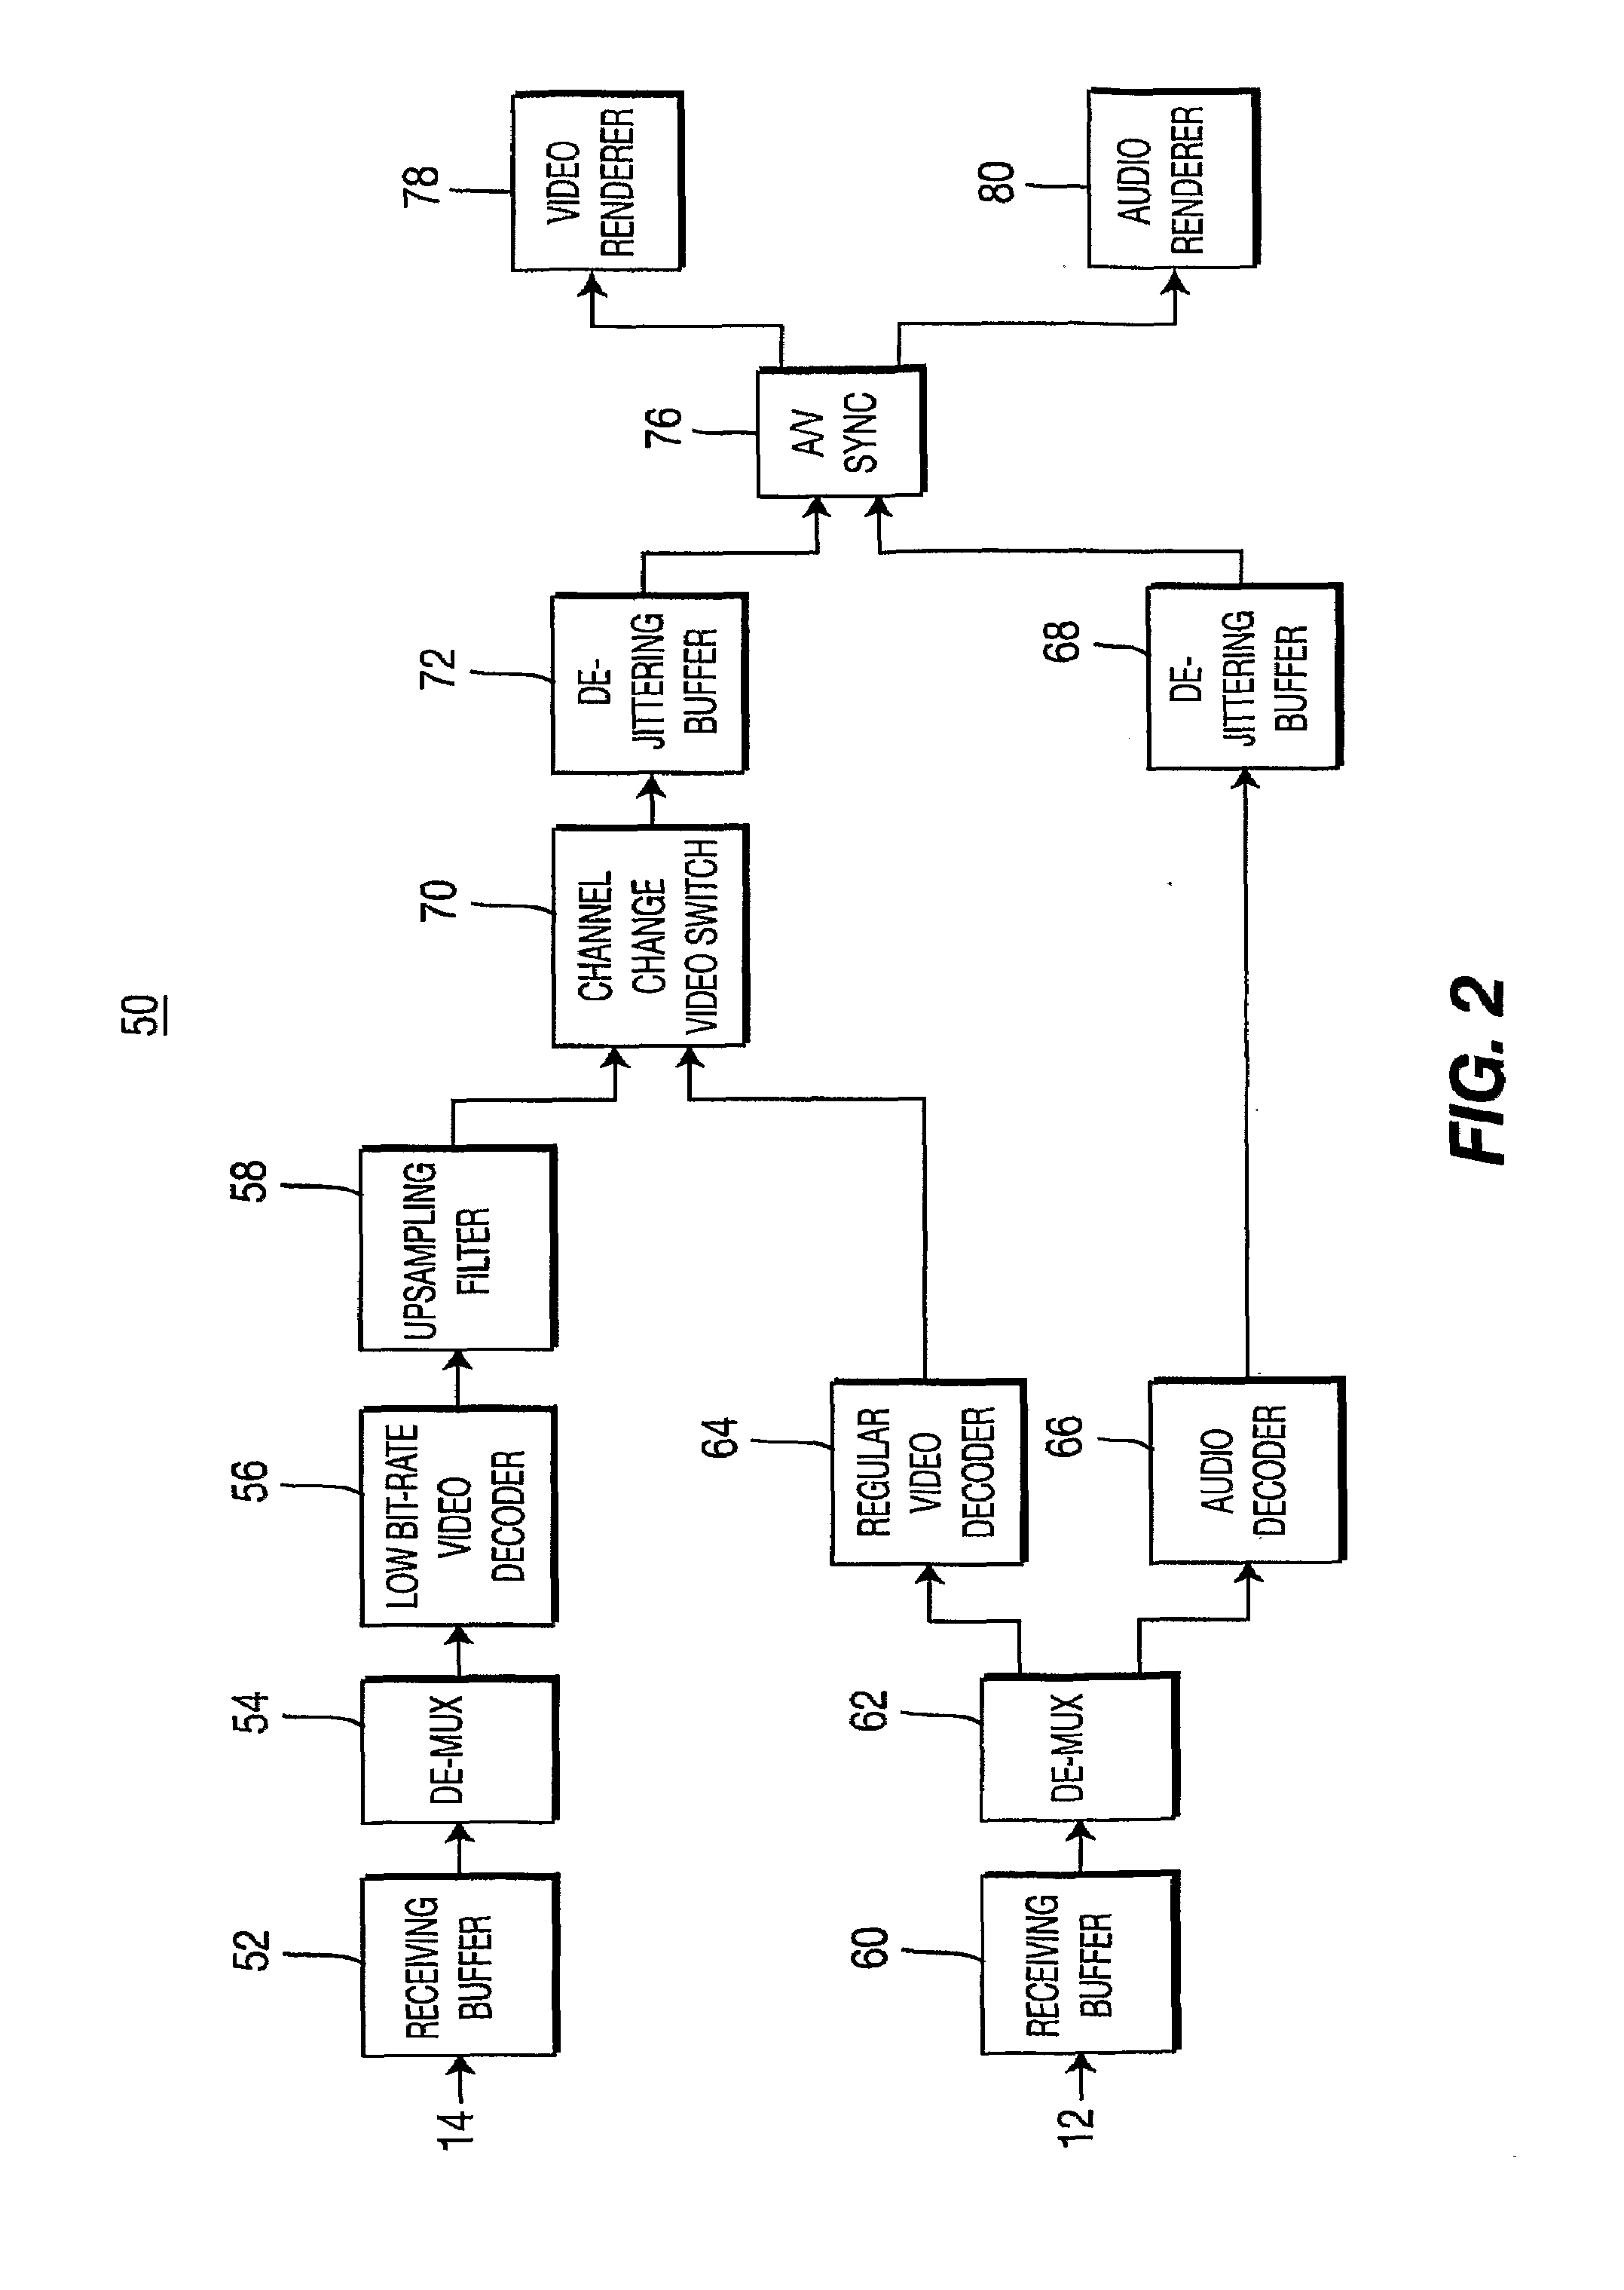 Method for reducing channel change times and synchronizing audio/video content during channel change